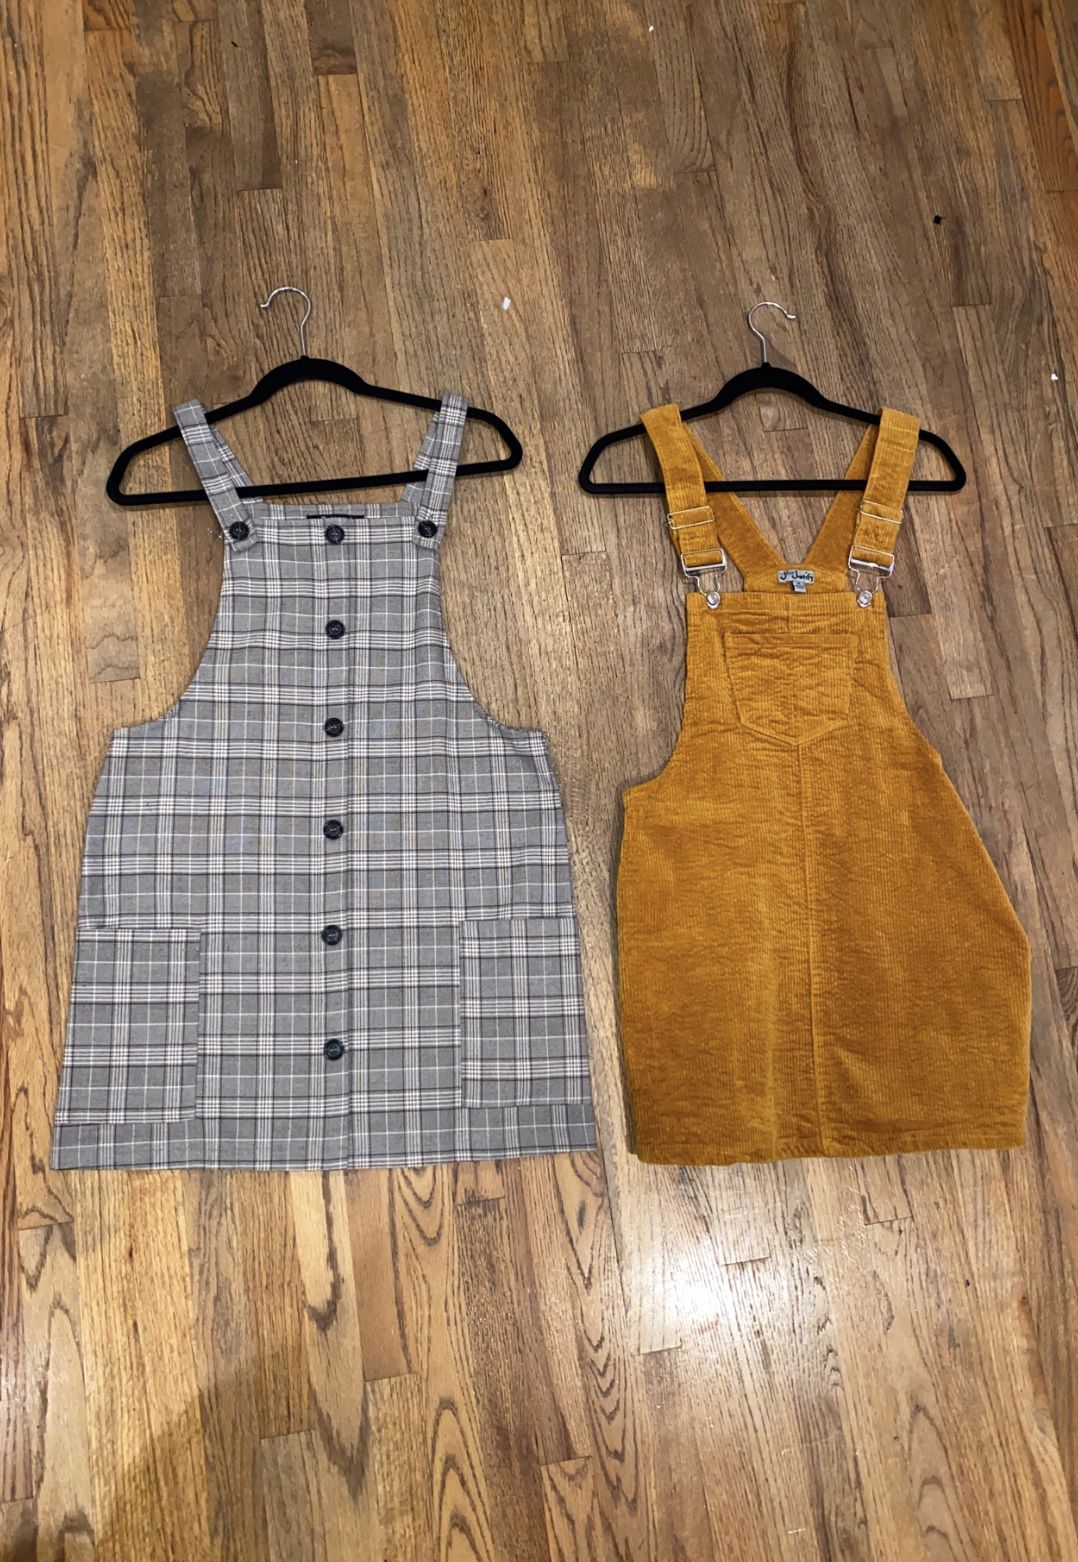 Overall dresses size M